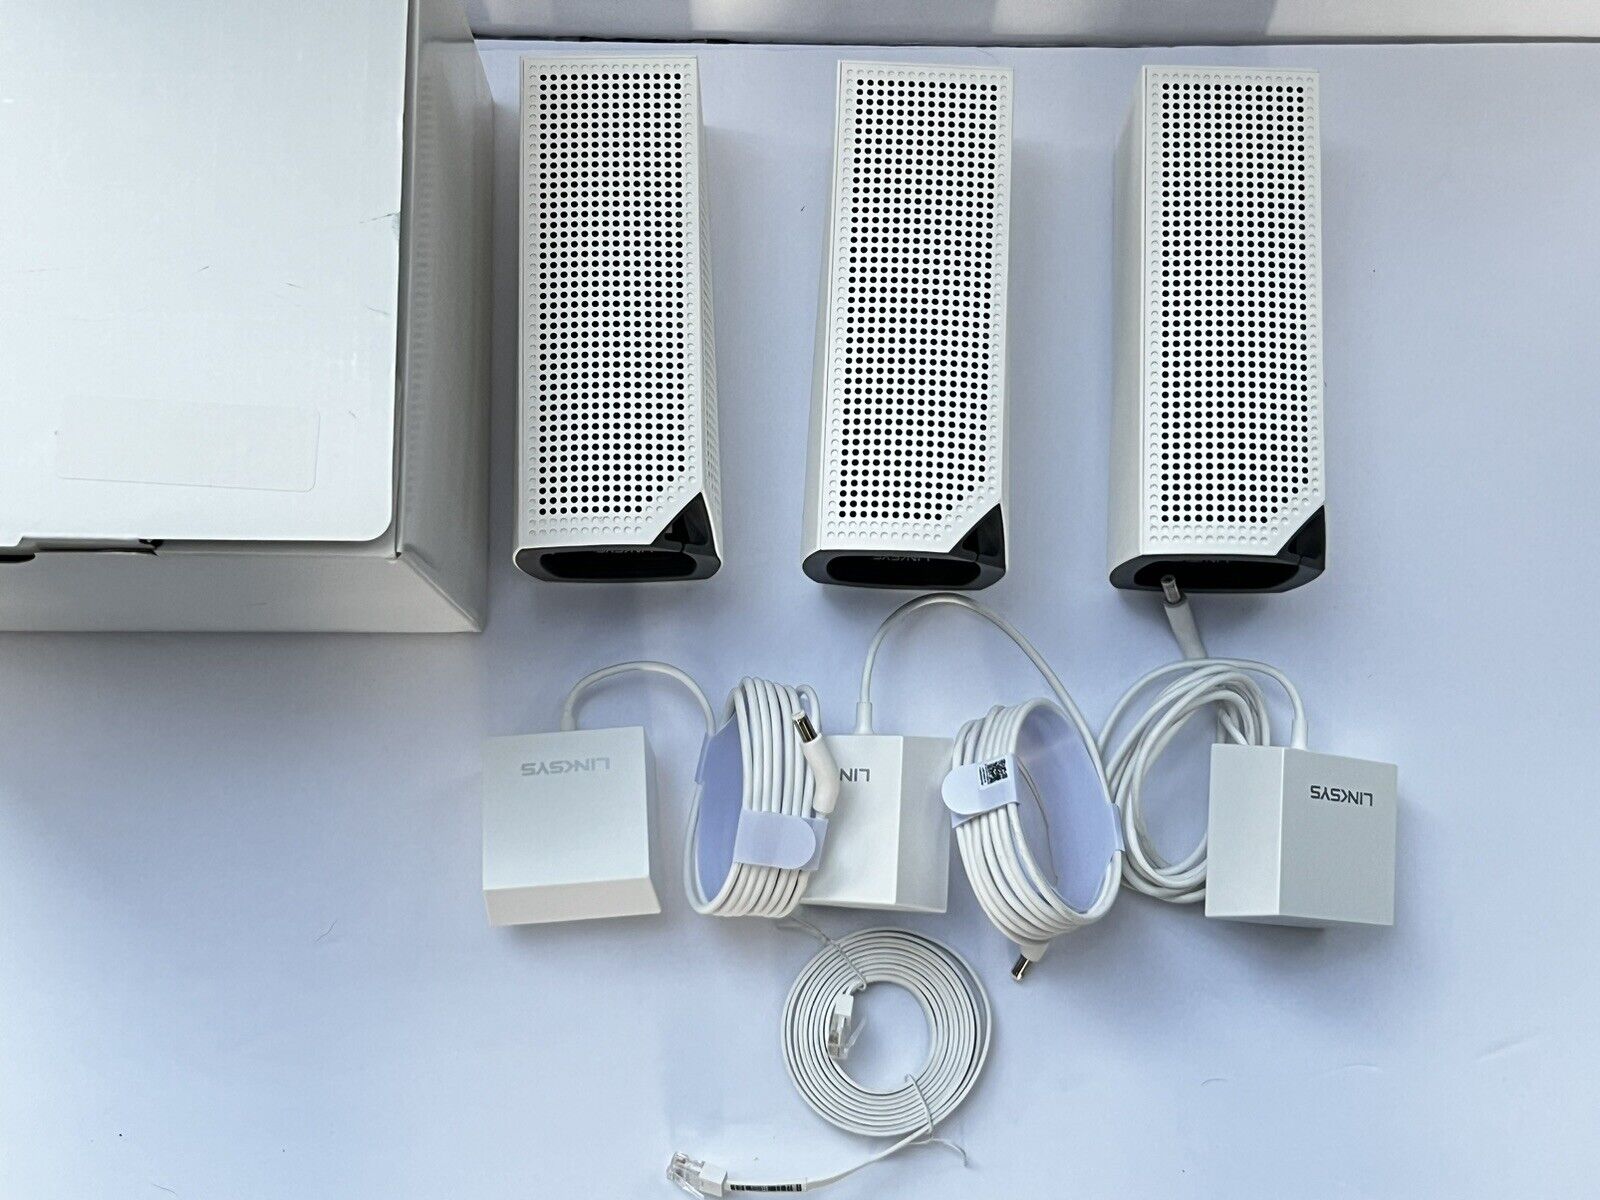 🔥 LinkSys Velop Mesh Routers WHW03 Tri-Band Mesh Wi-Fi System (Lot of 3) 🔥